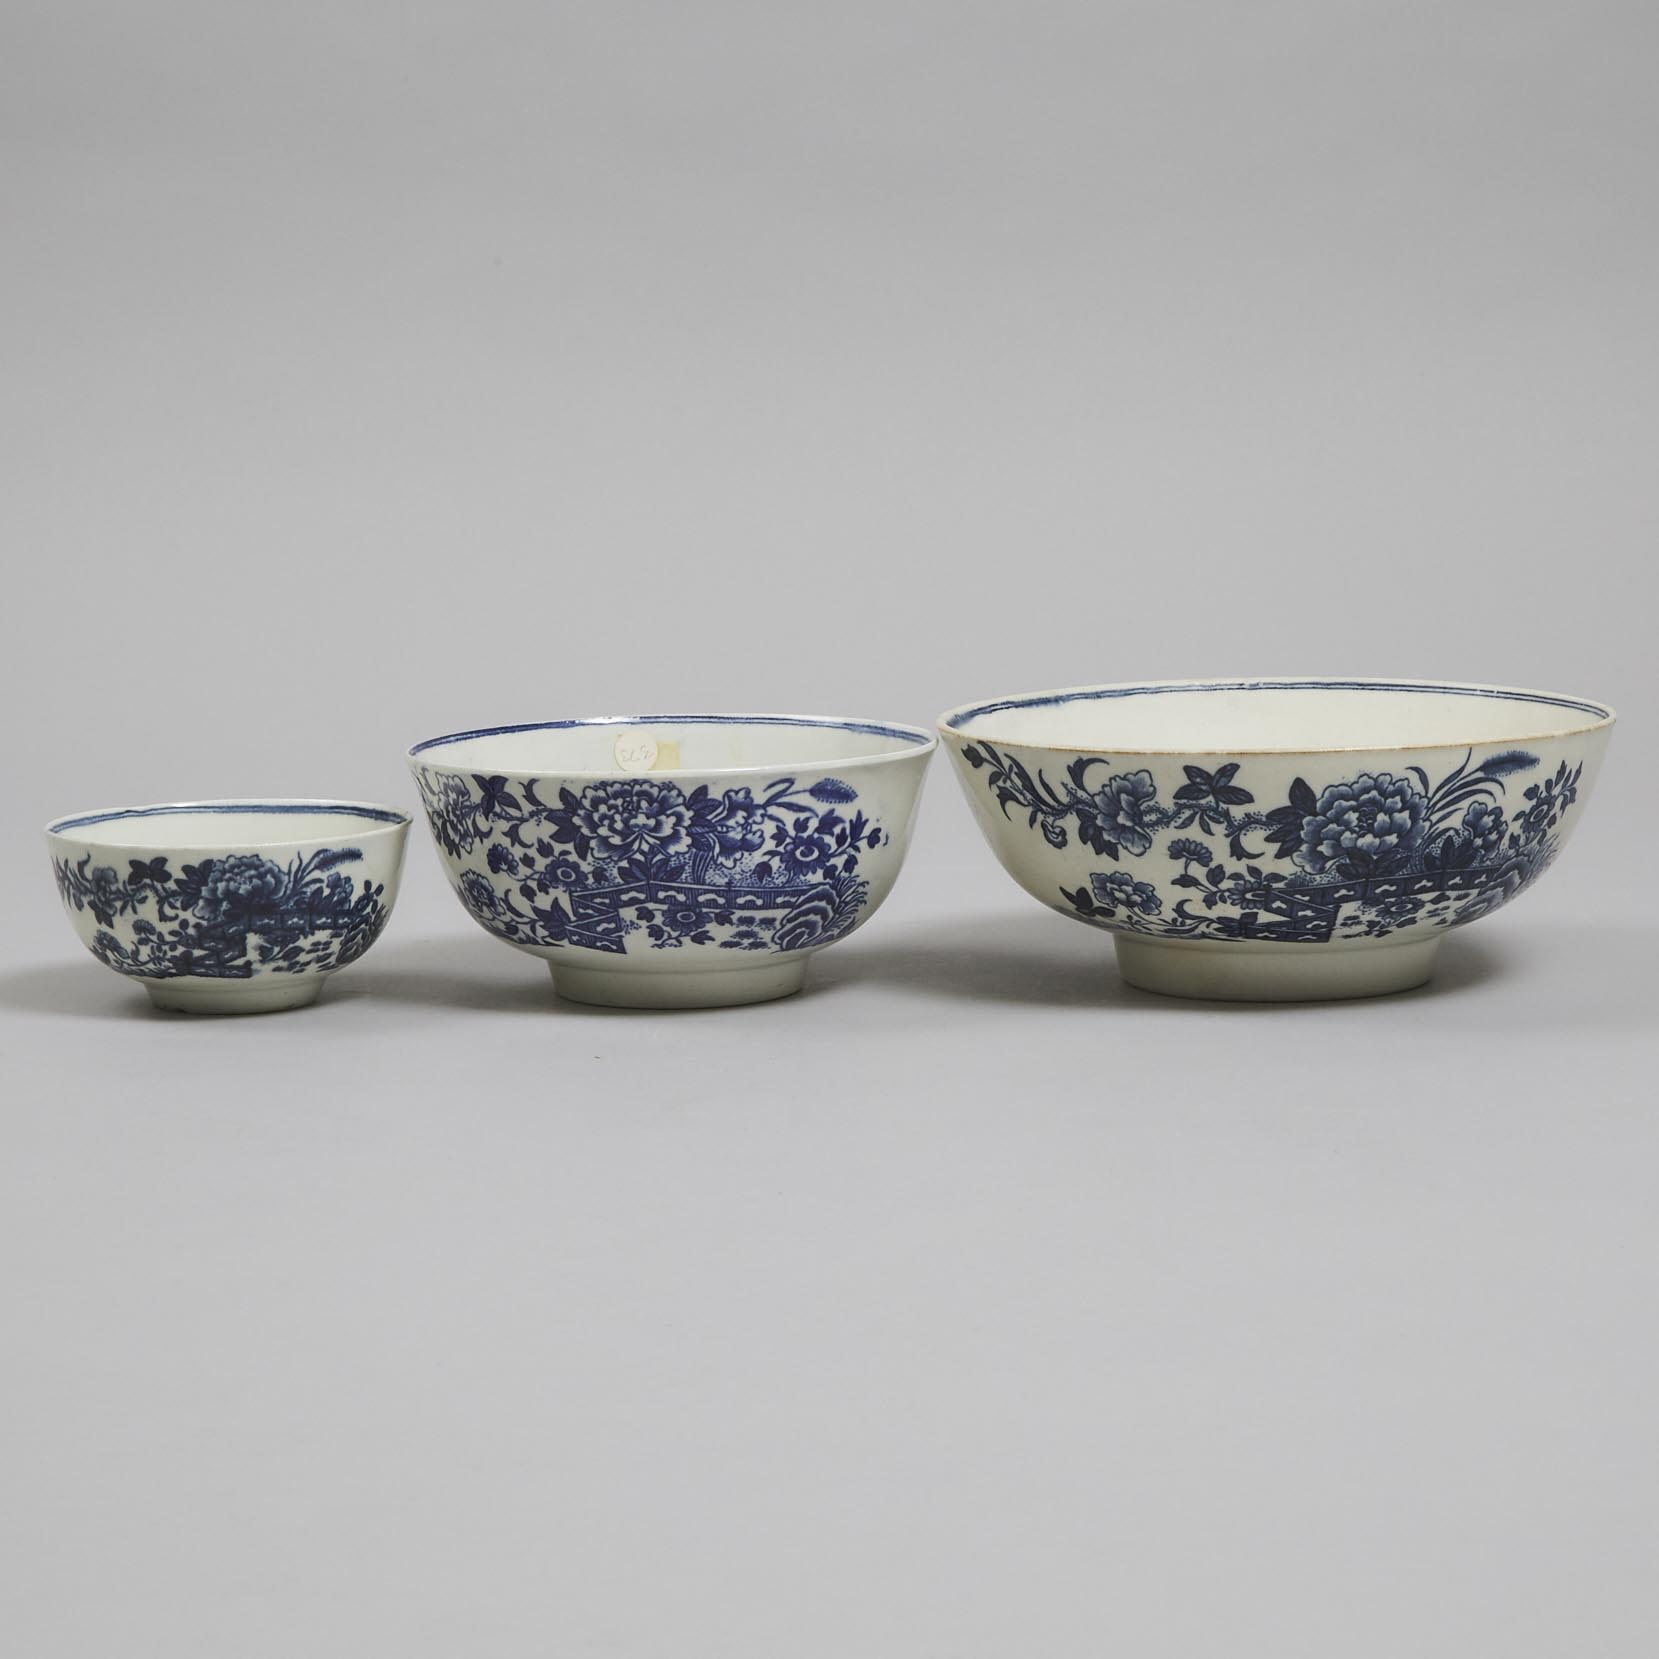 Three Worcester Blue Printed 'Fence' Pattern Bowls, c.1775